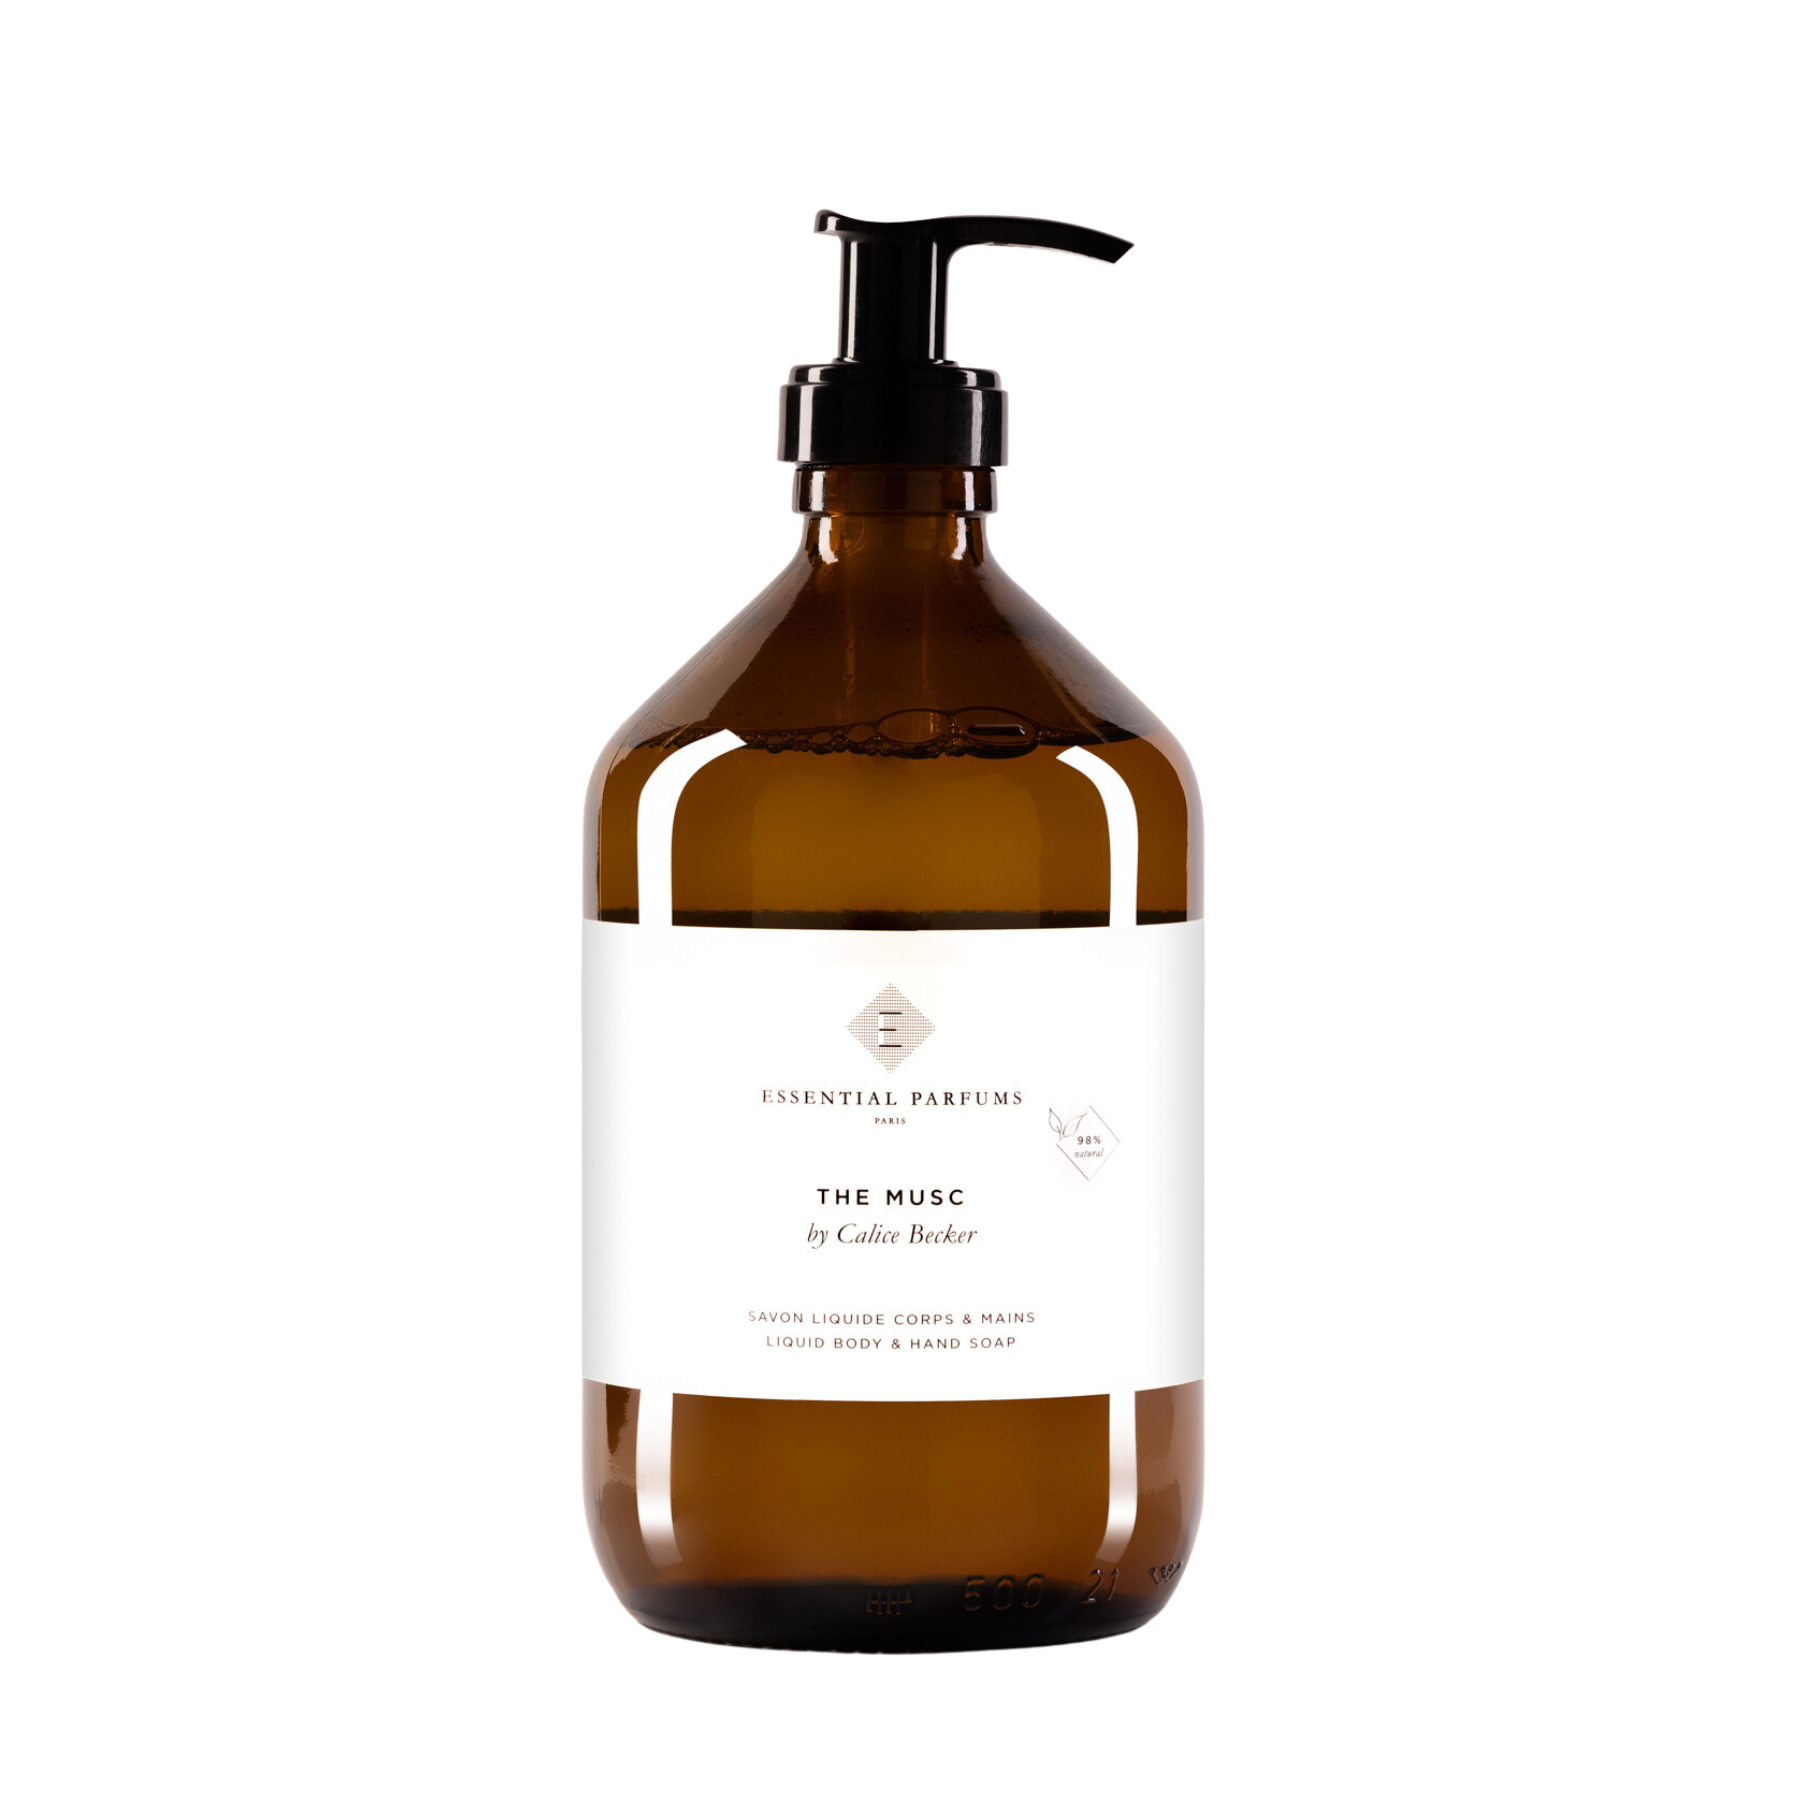 Essential Parfums The Musc Hand and Body Soap 500ml